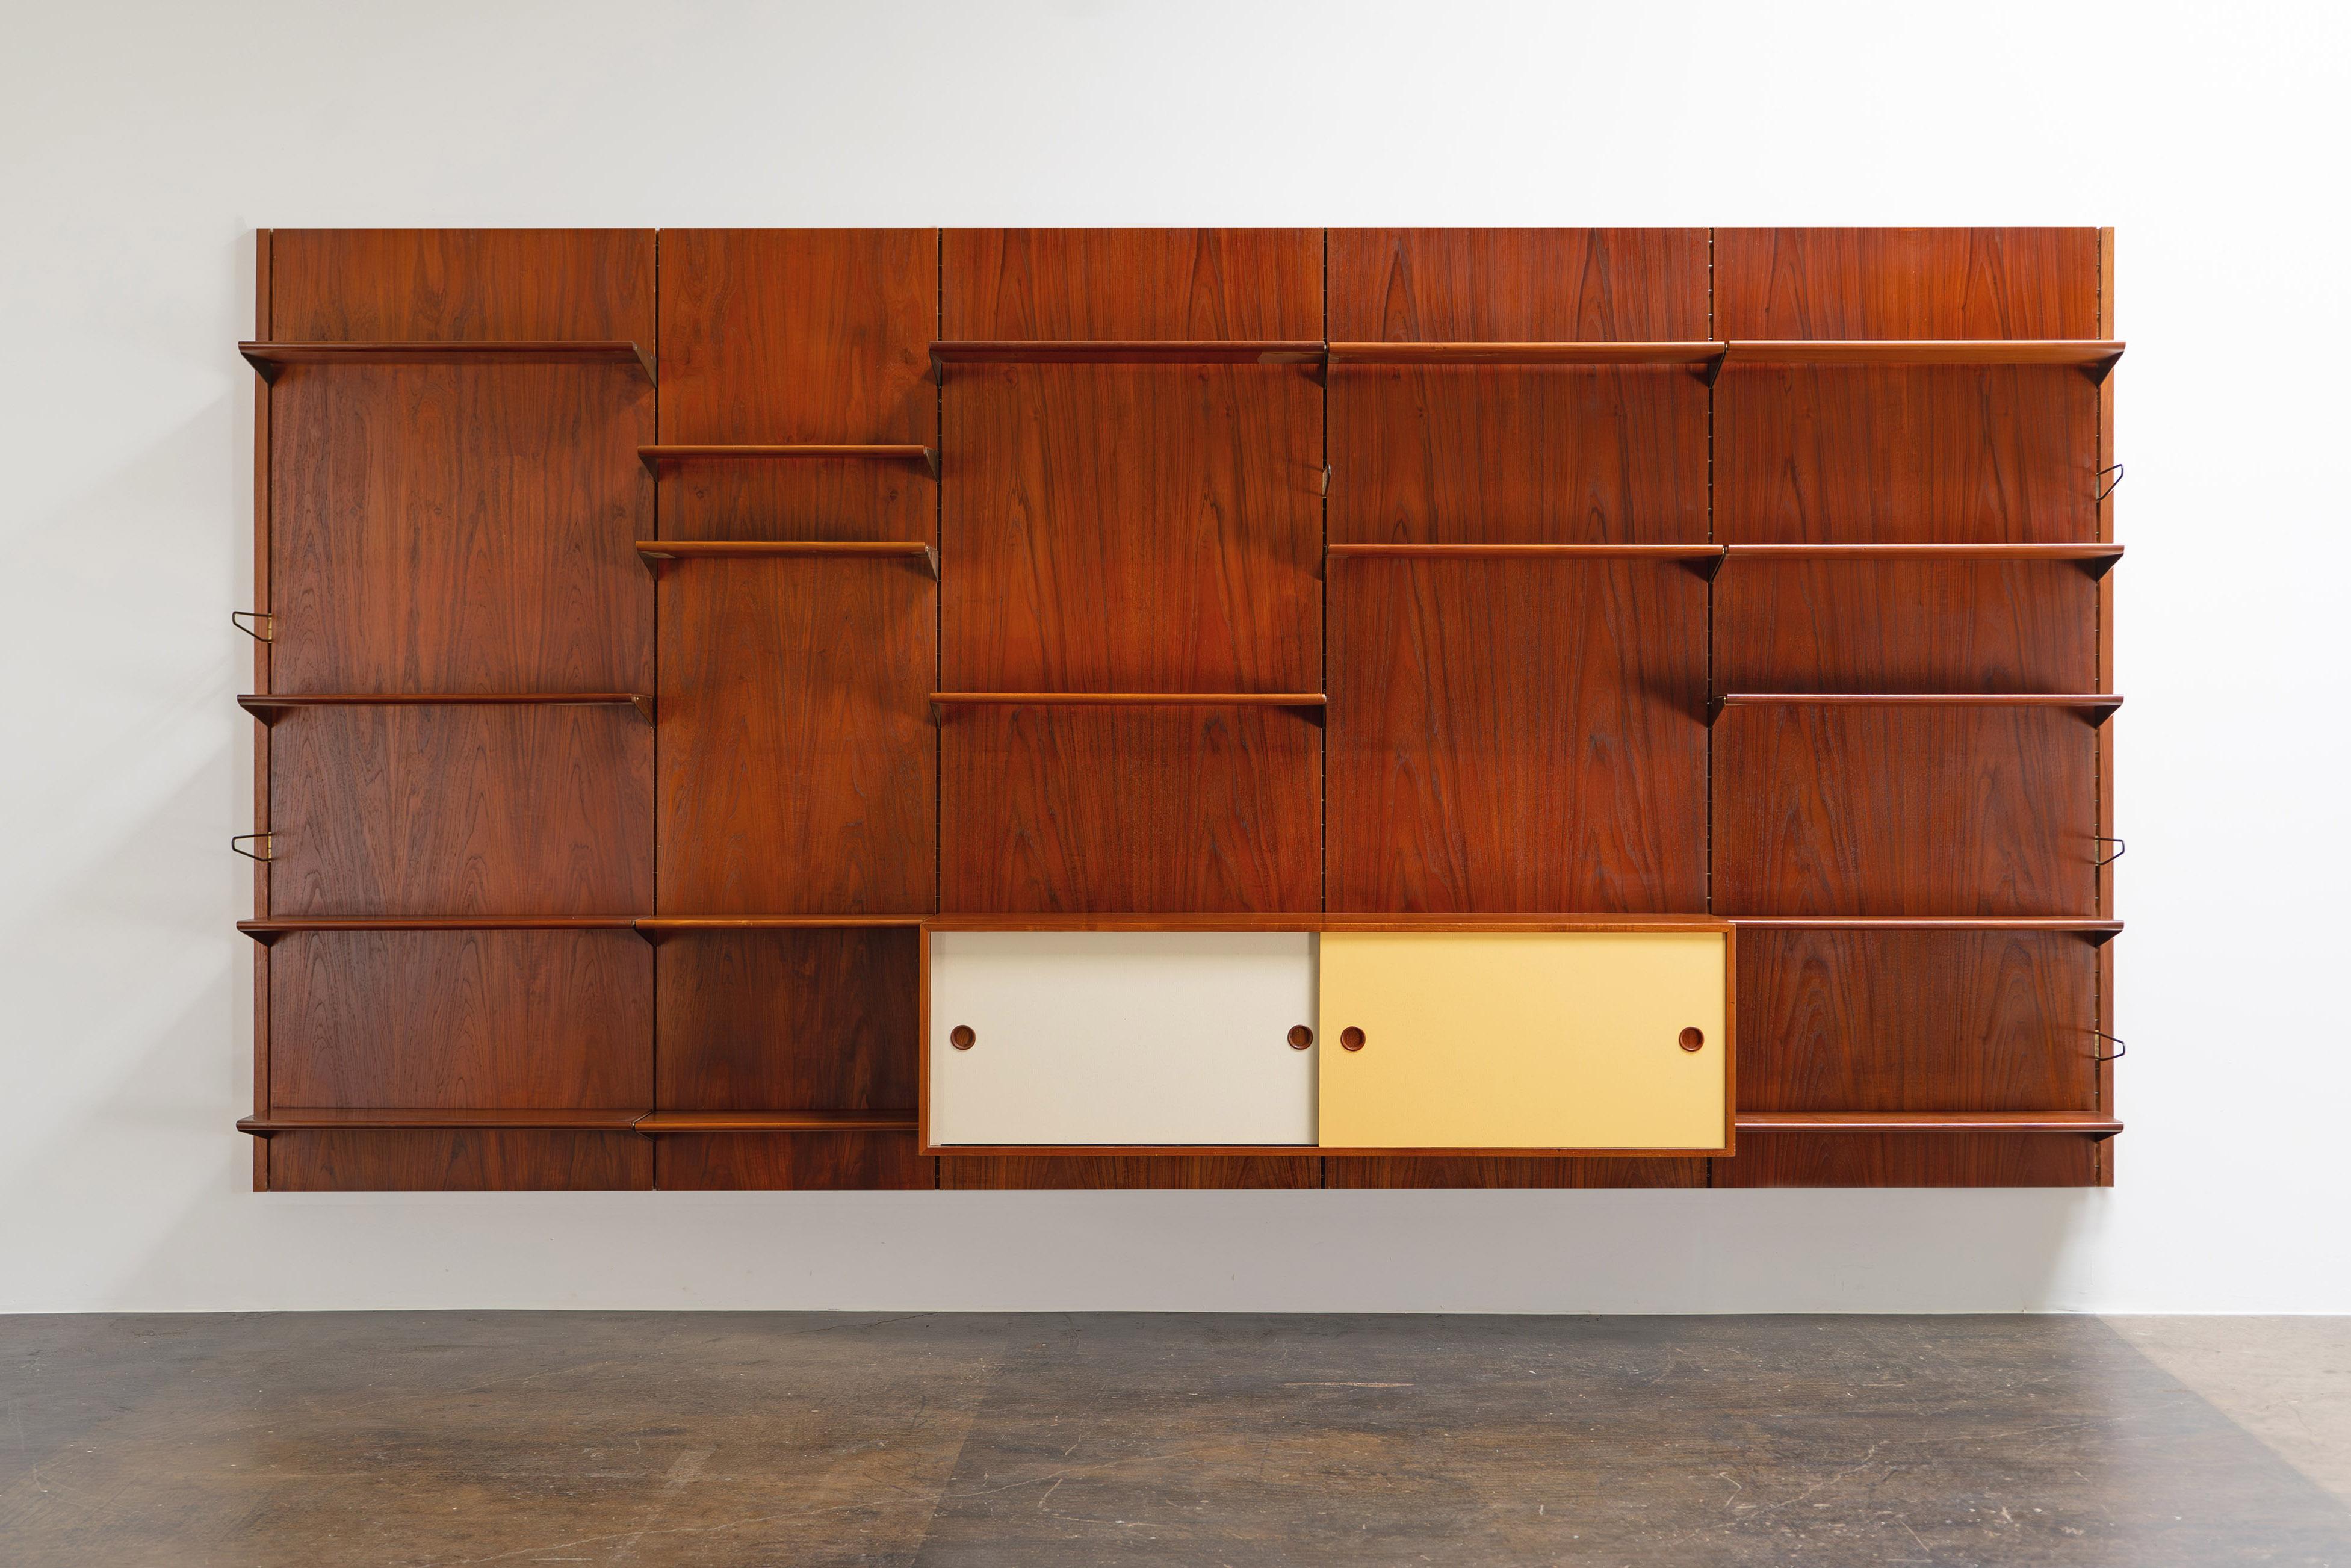 Large modular wall shelf BO71 made of beautiful teak, designed by Finn Juhl. The placement of the shelves and sideboard can be freely chosen. The shelf was manufactured by Bovirke in the 1960s.